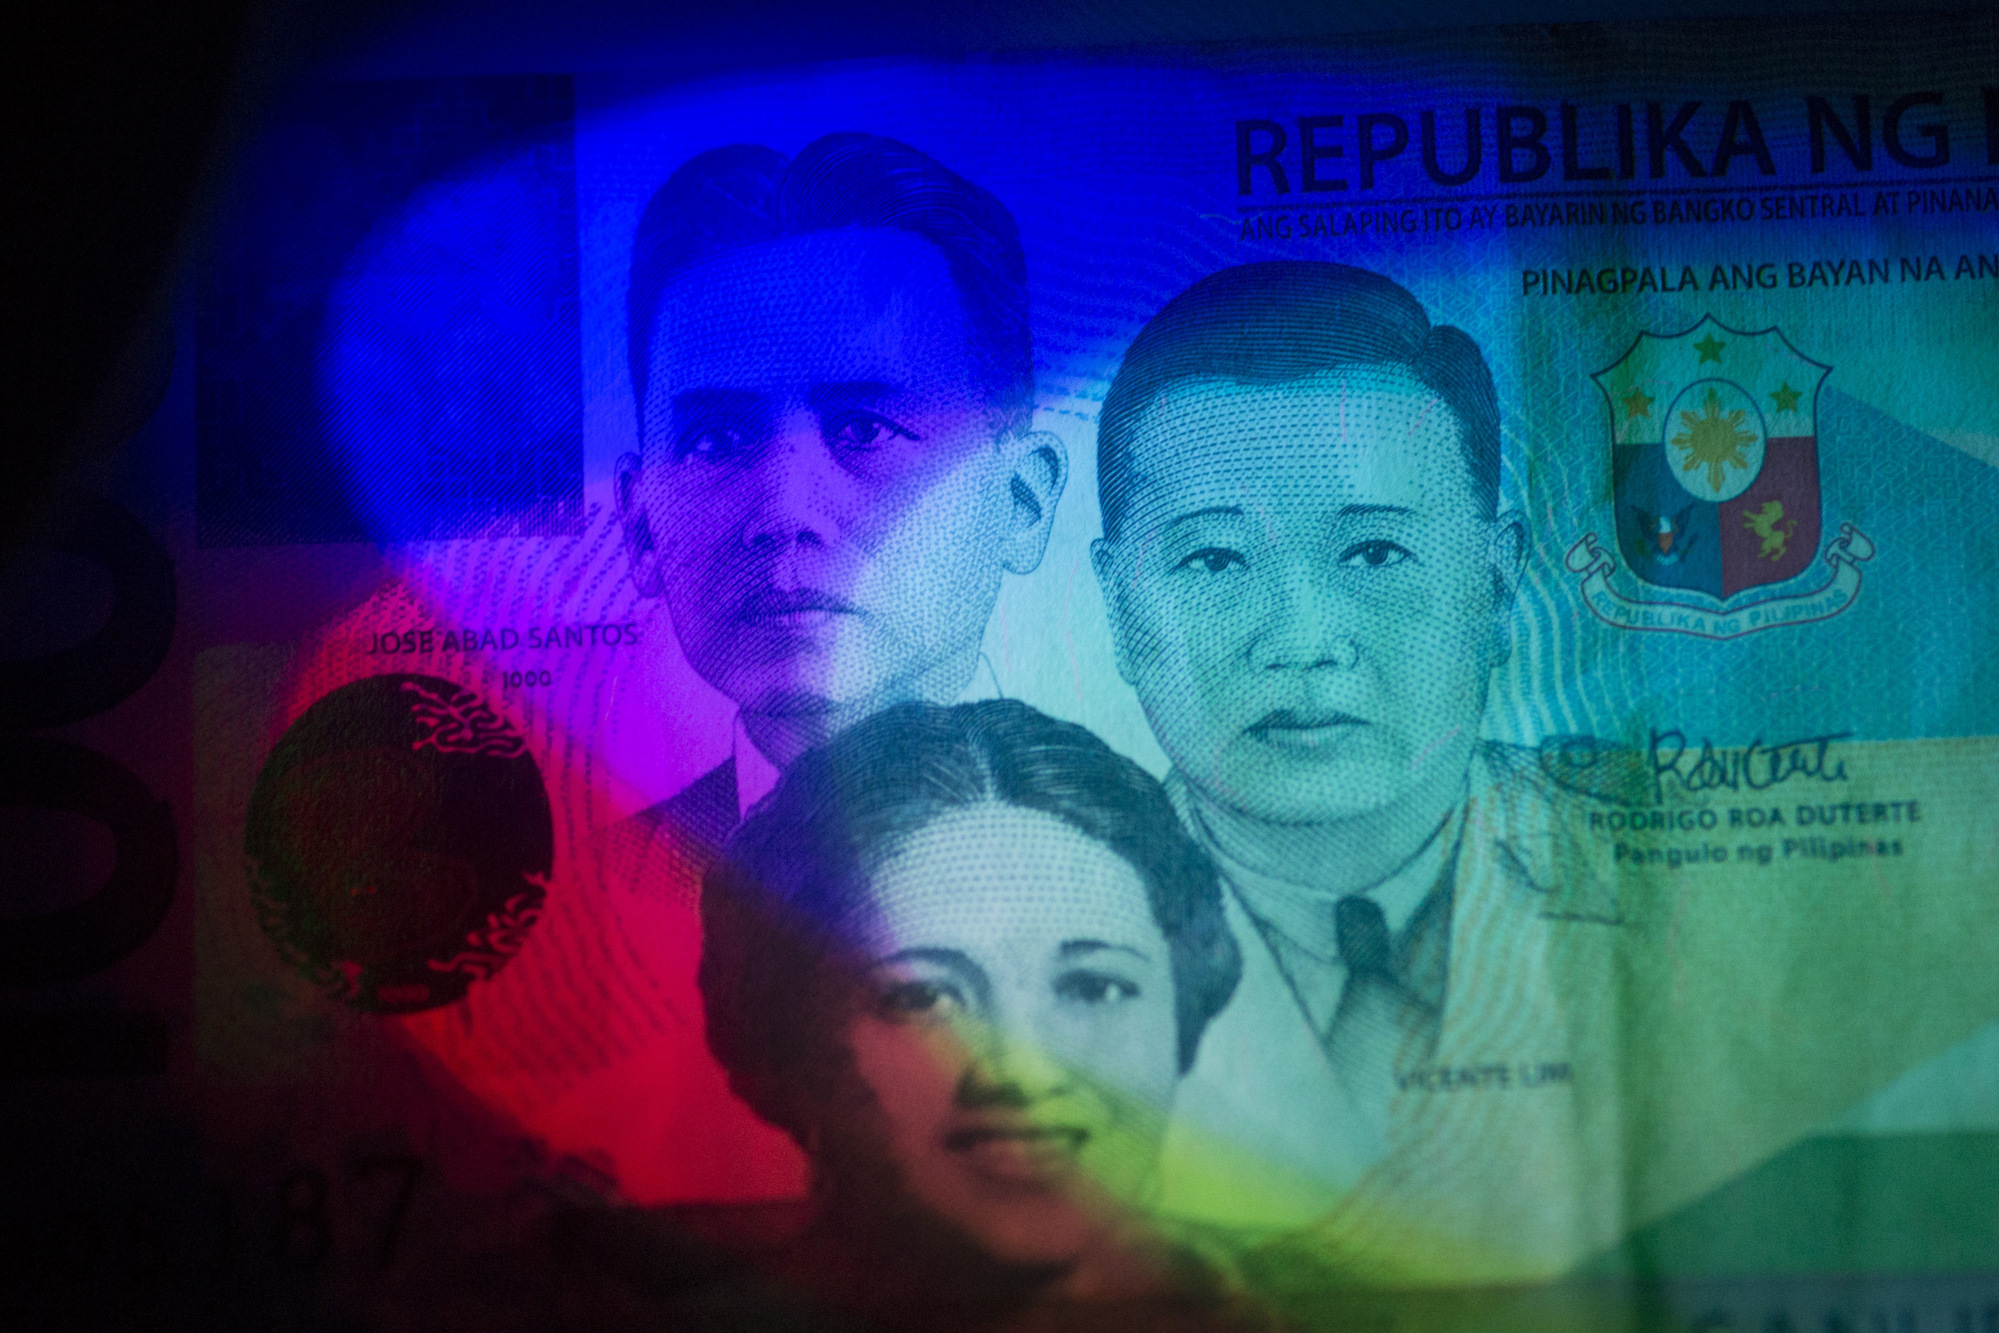 The New Face of the 1000 Philippine Peso Bill